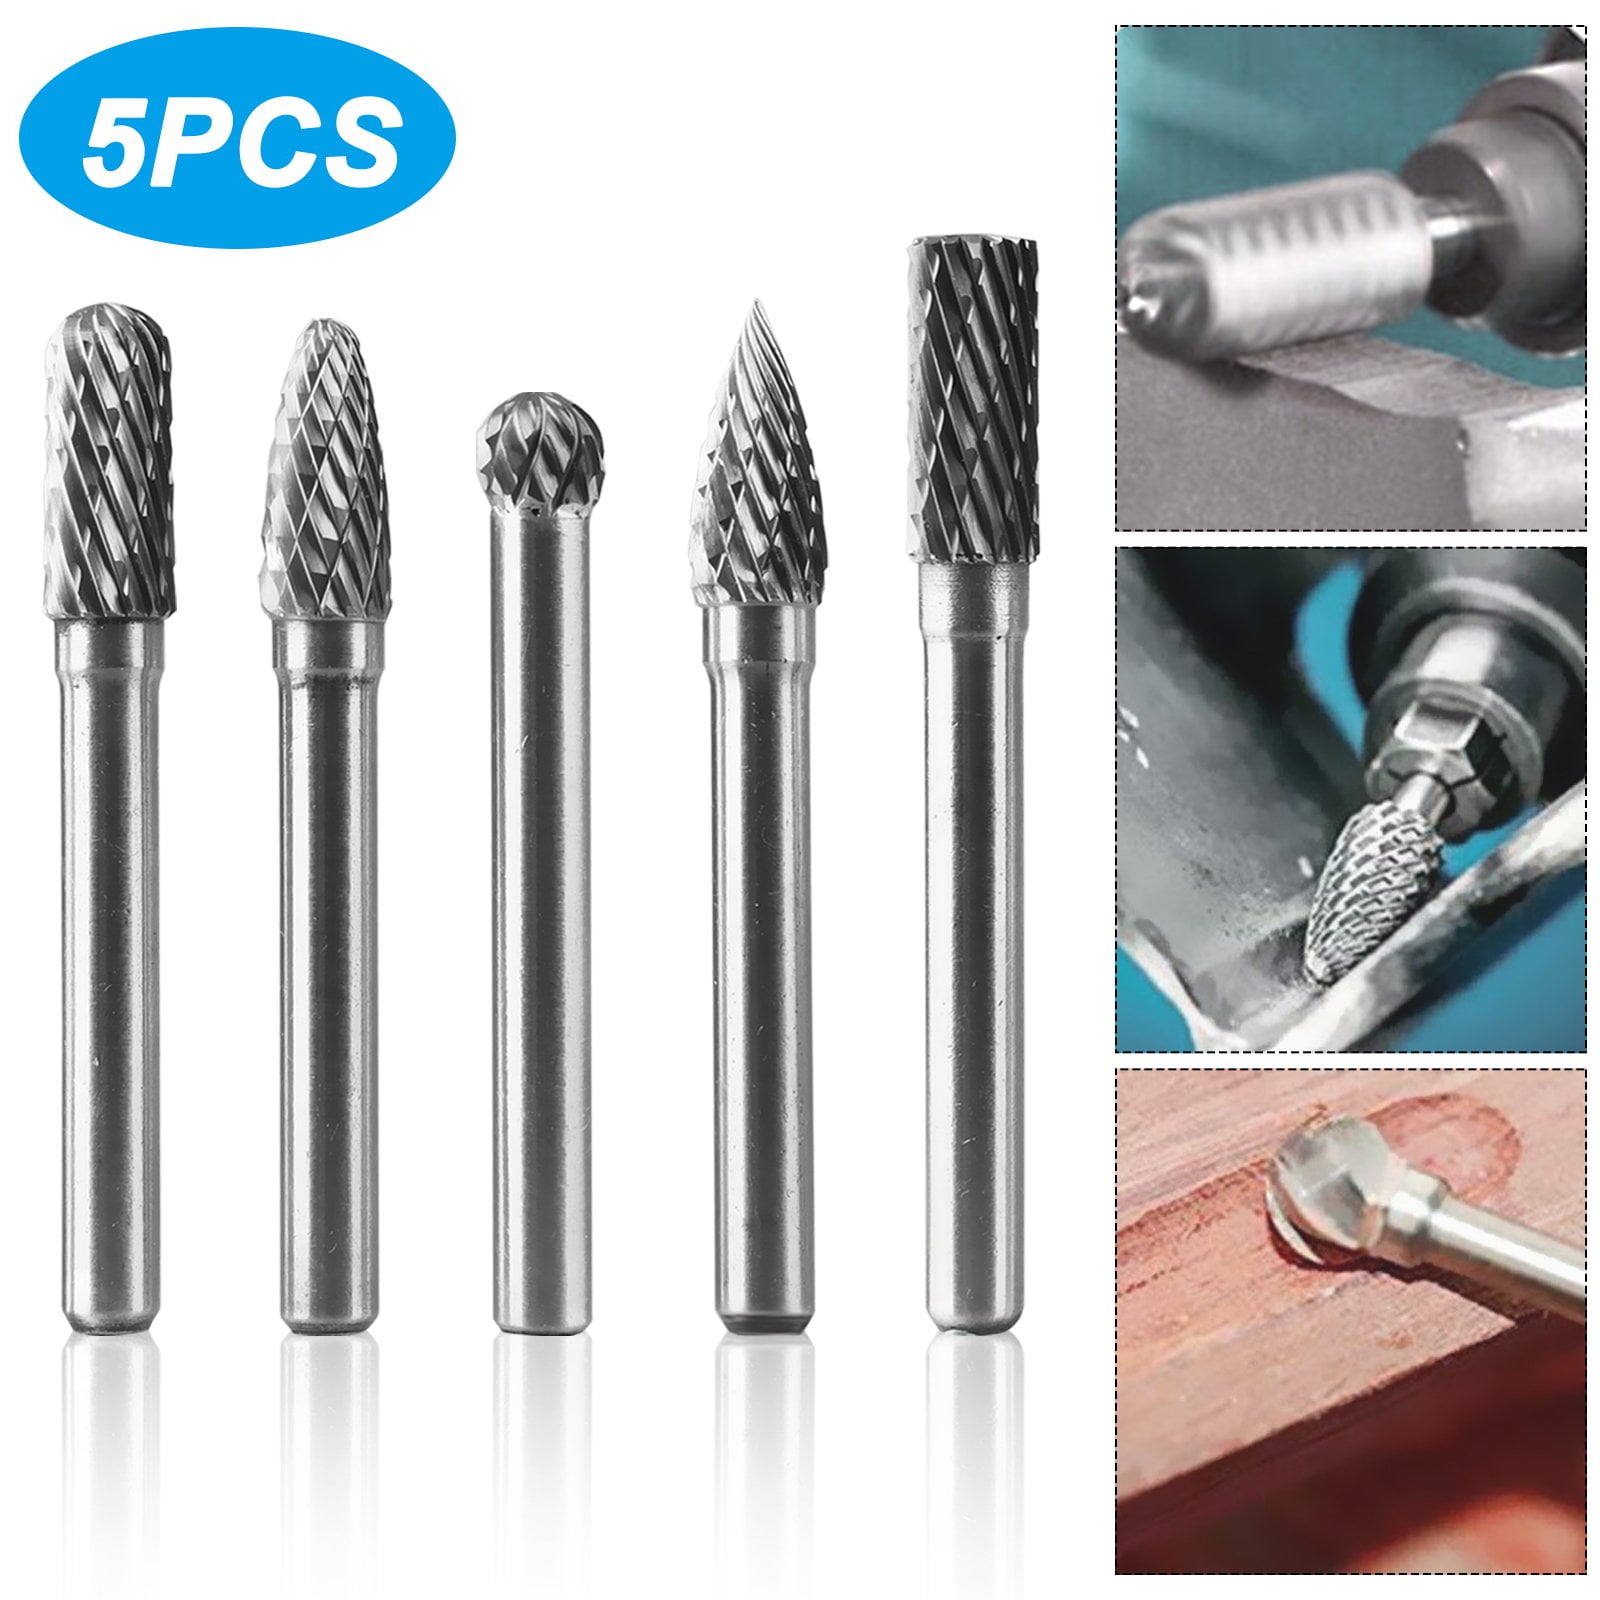 10PCS 1/4" Oxide Steel Grinding Wood Milling File Grinder Rotary Burr Drill Bits 